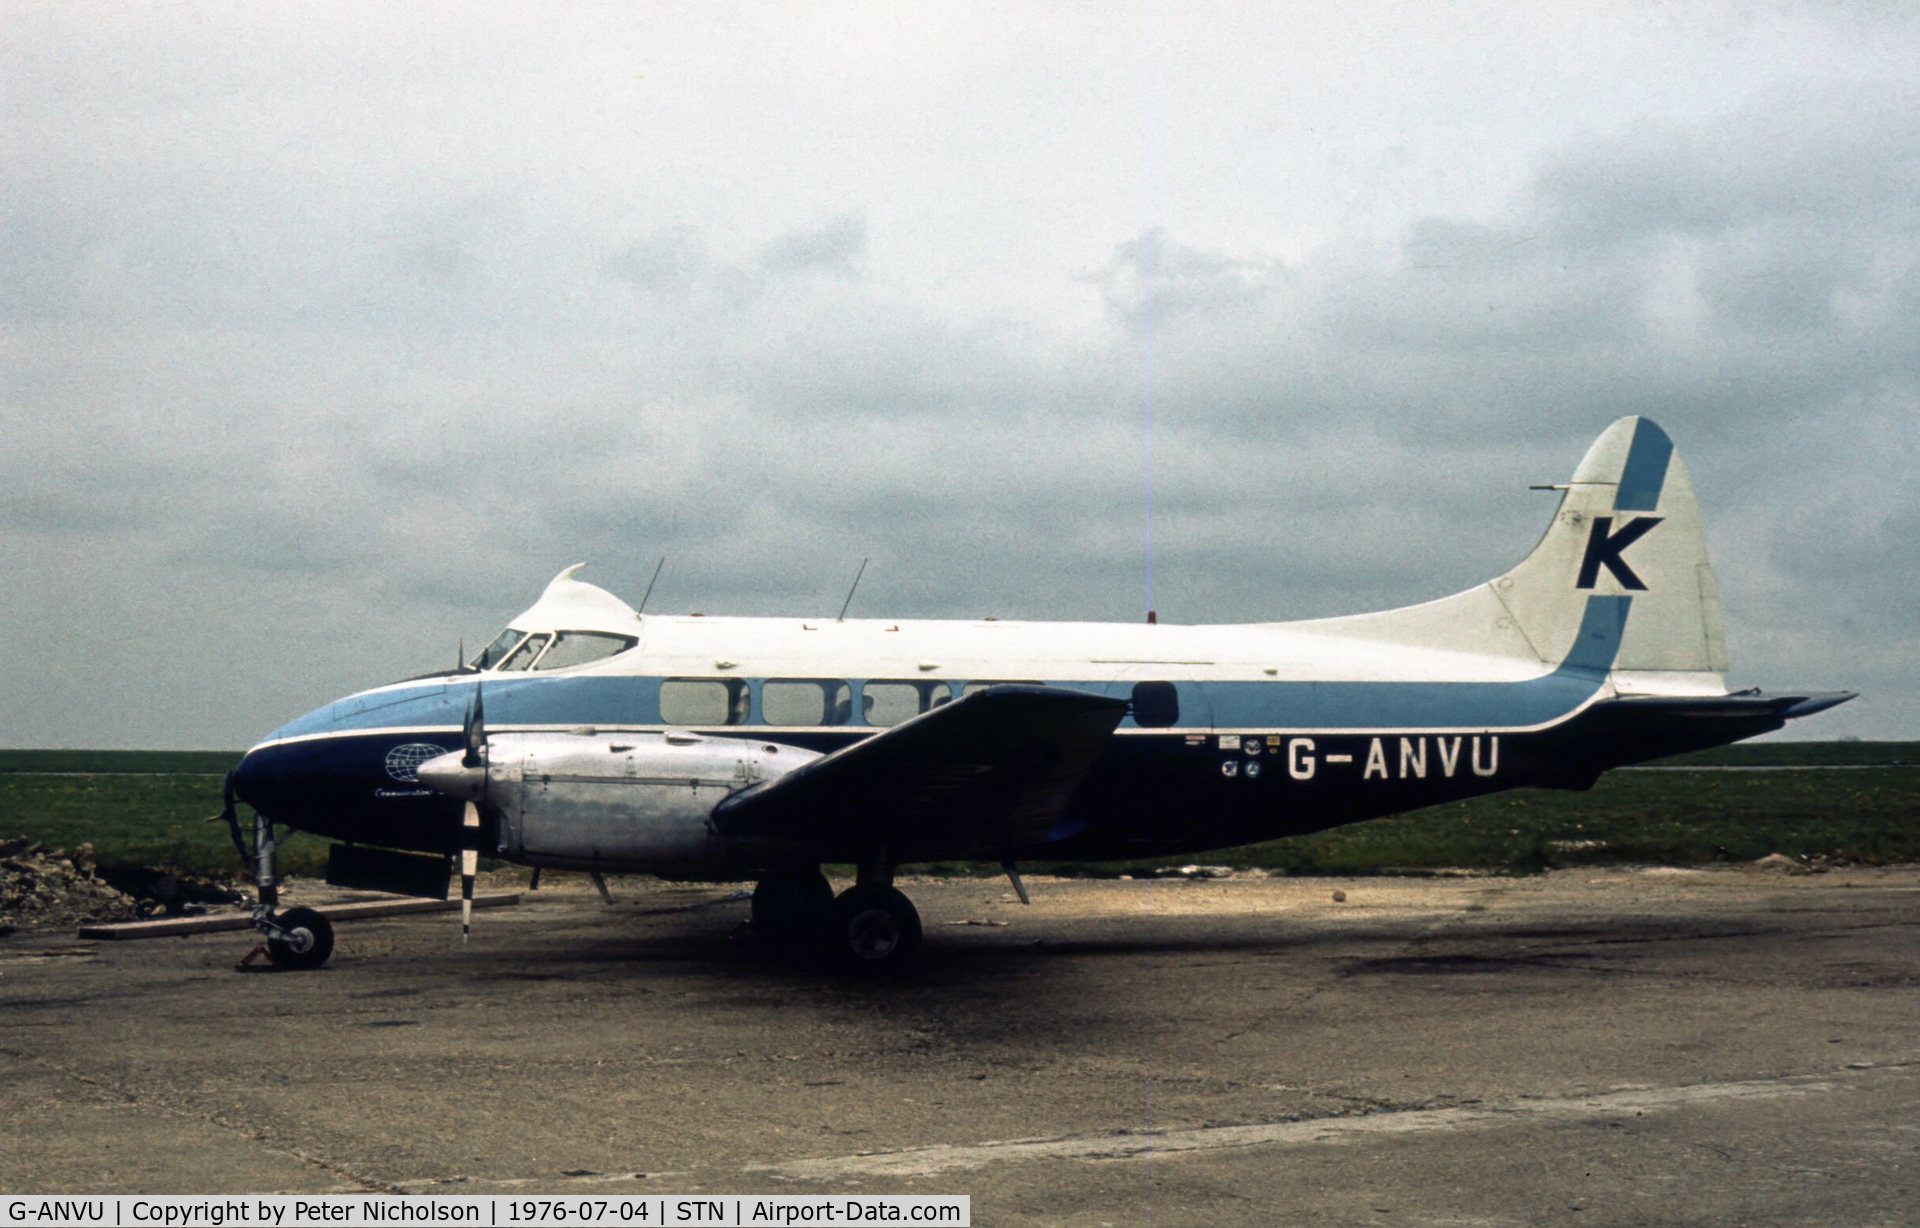 G-ANVU, 1947 De Havilland DH-104 Dove 1B C/N 04082, This Dove was seen at London Stansted in the Summer of 1976.